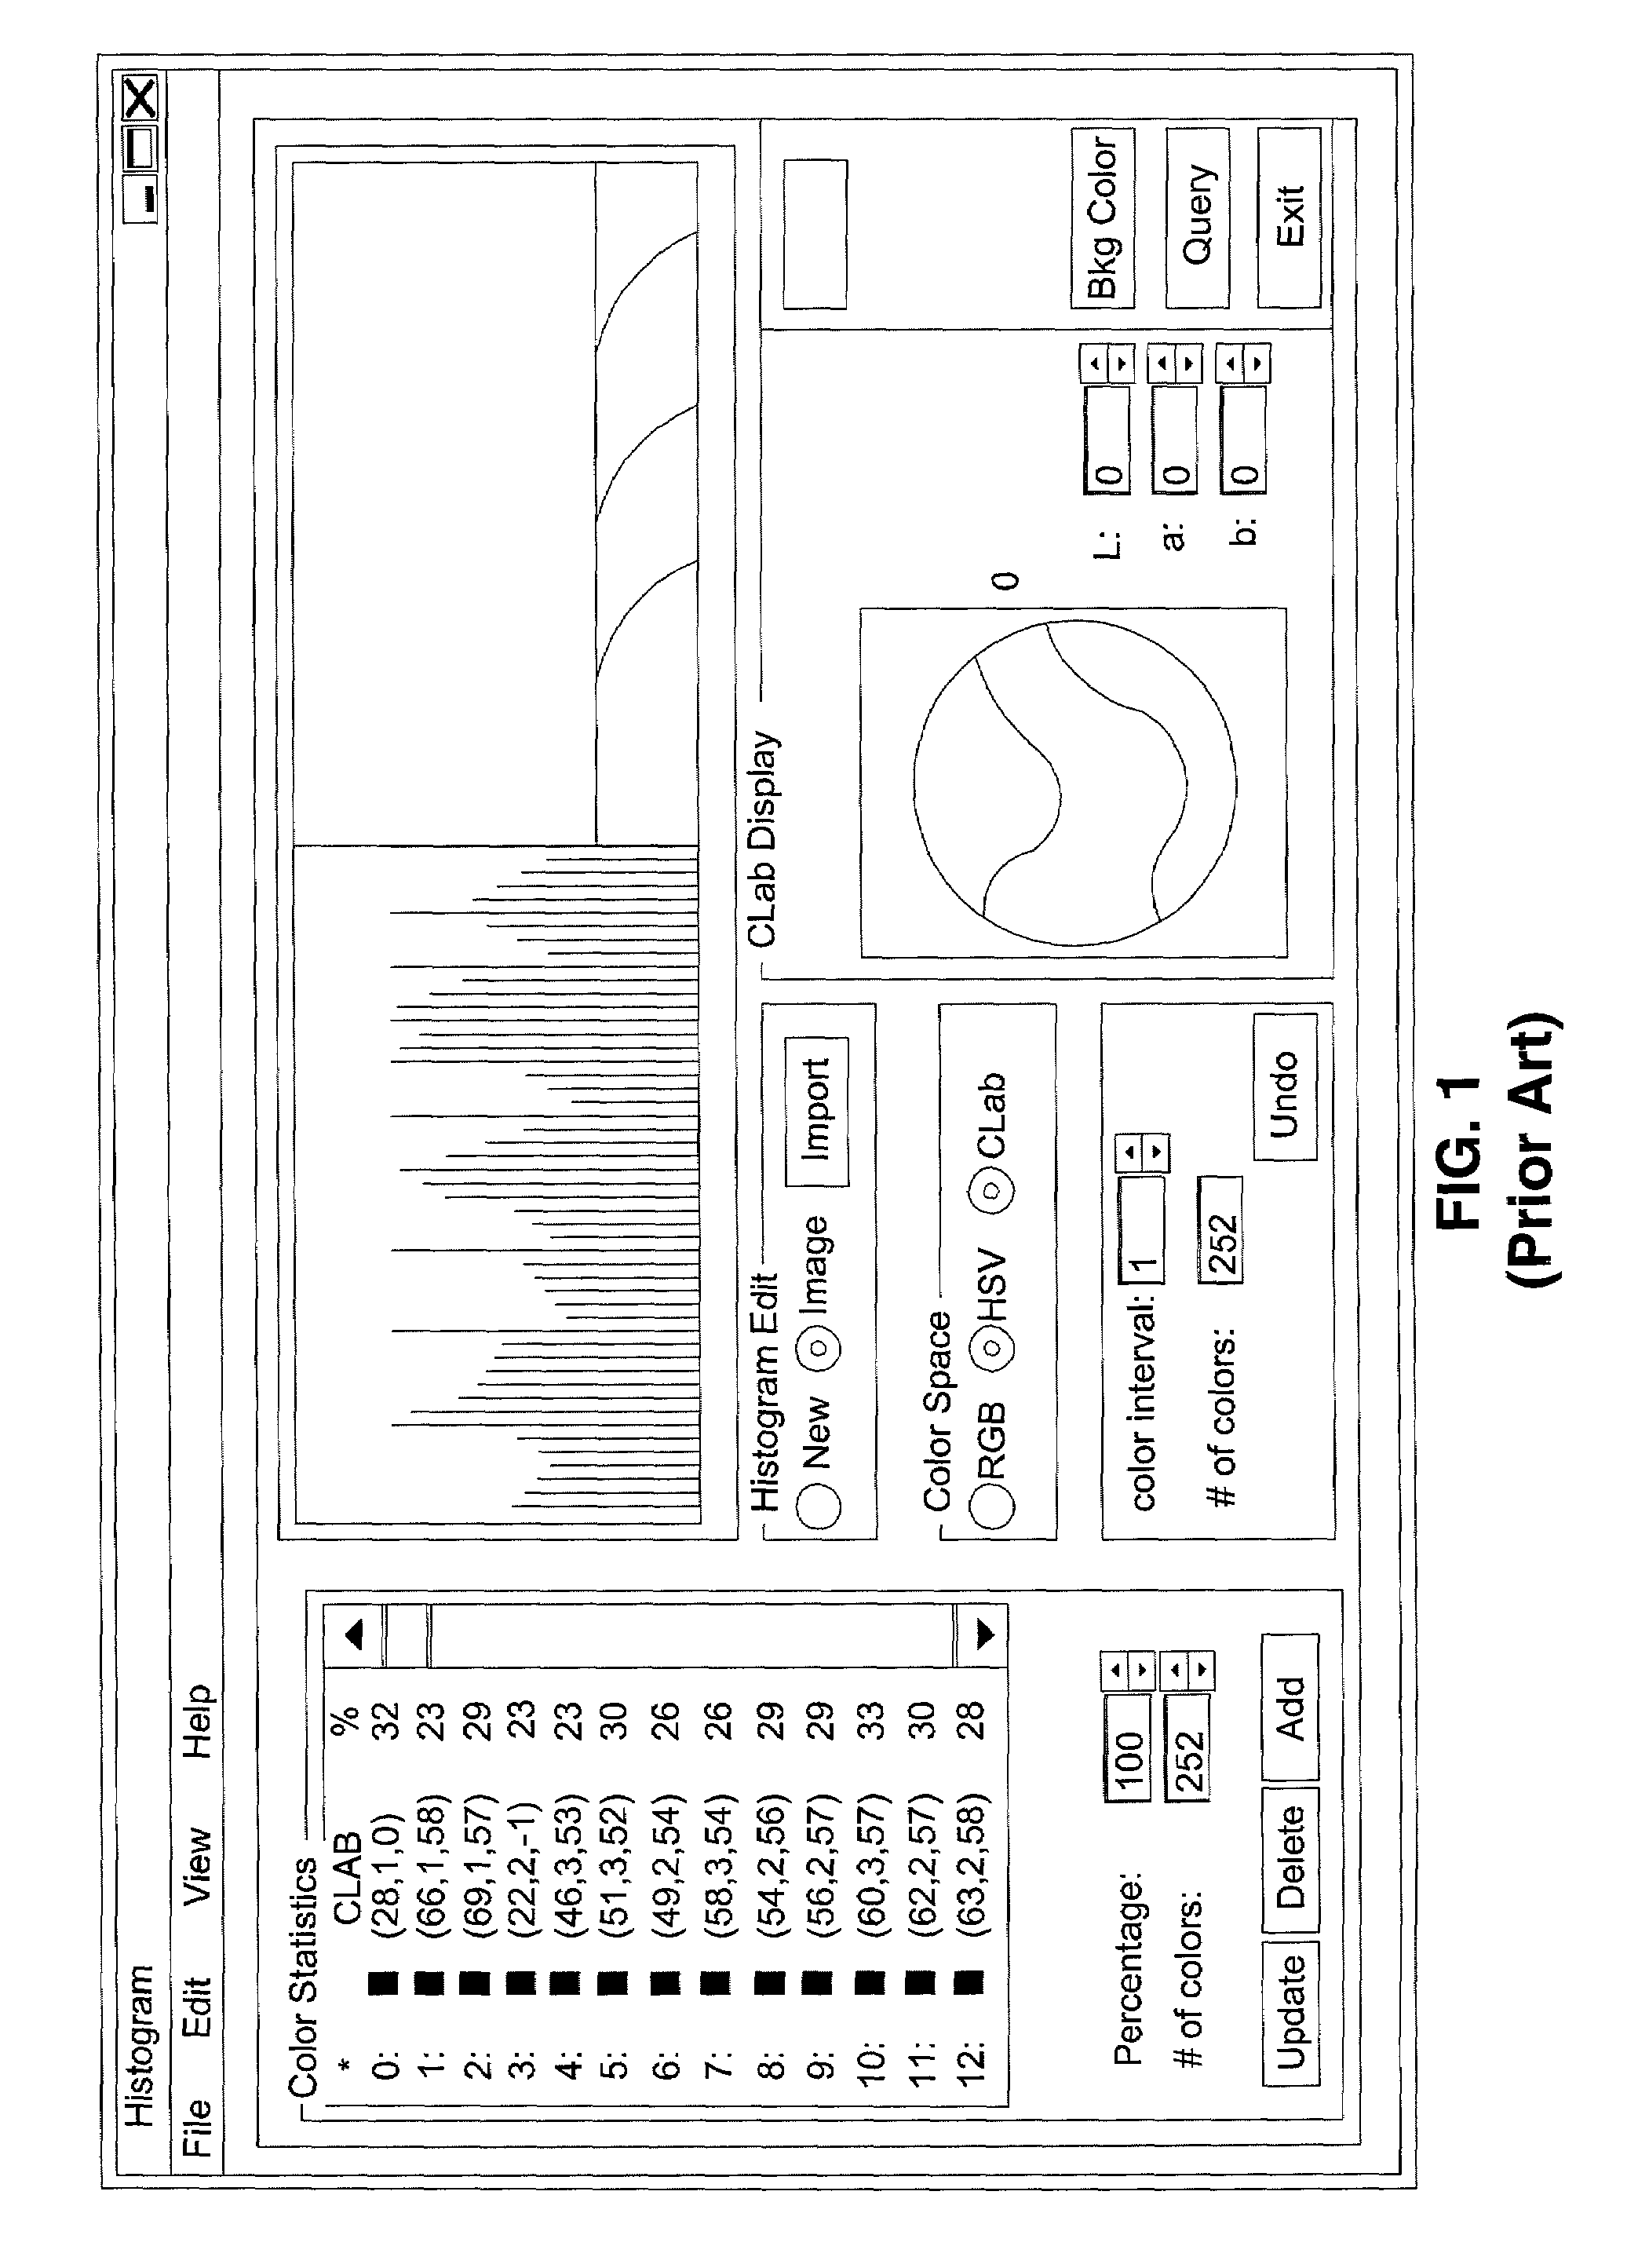 Method and system for utilizing embedded MPEG-7 content descriptions